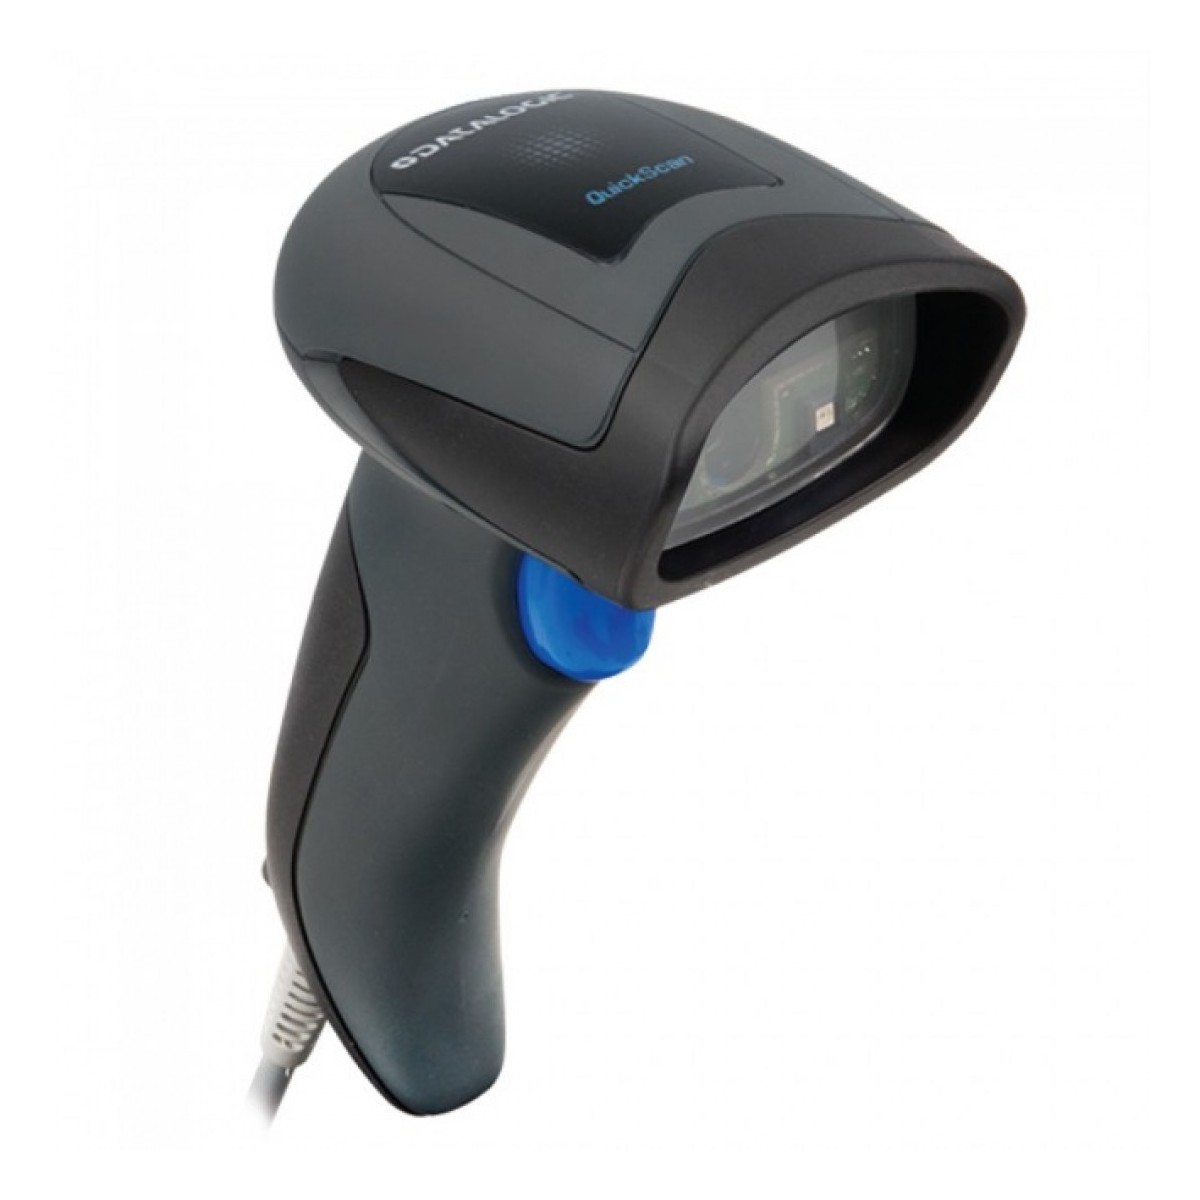 QuickScan QD2430 Kit - Included Stand / USB Cable / Scanner - Handheld Barcode Scanner - Cable Connectivity - 1D - 2D - Black